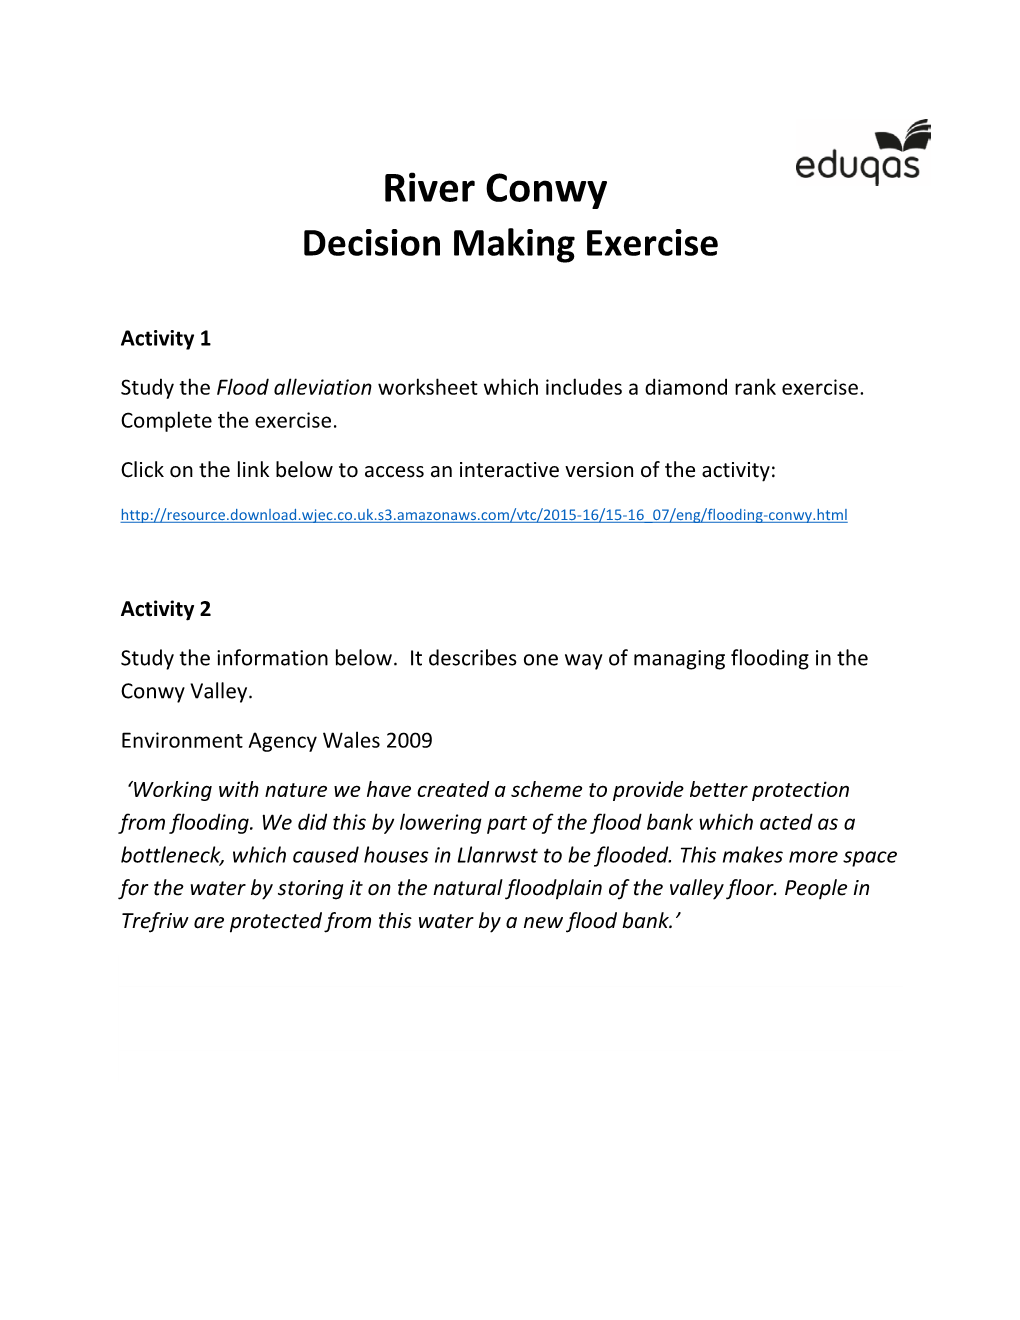 River Conwy Decision Making Exercise